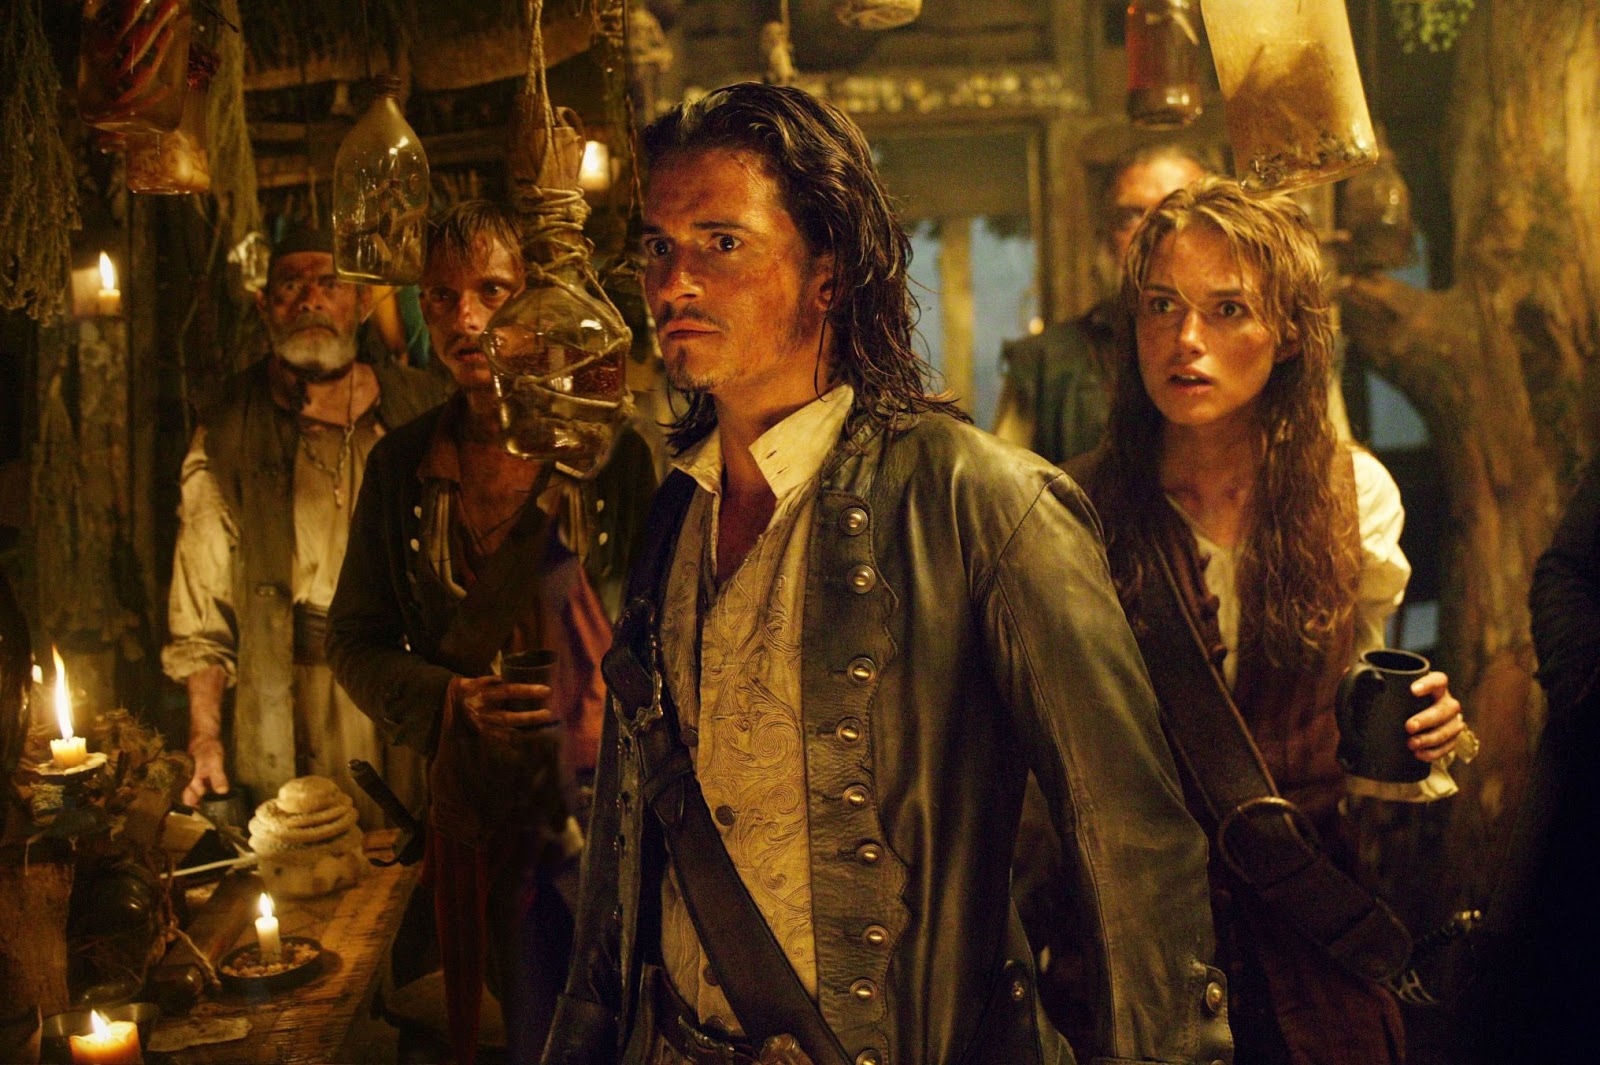 Orlando Bloom as Will Turner in The Pirates of the Carribean ...